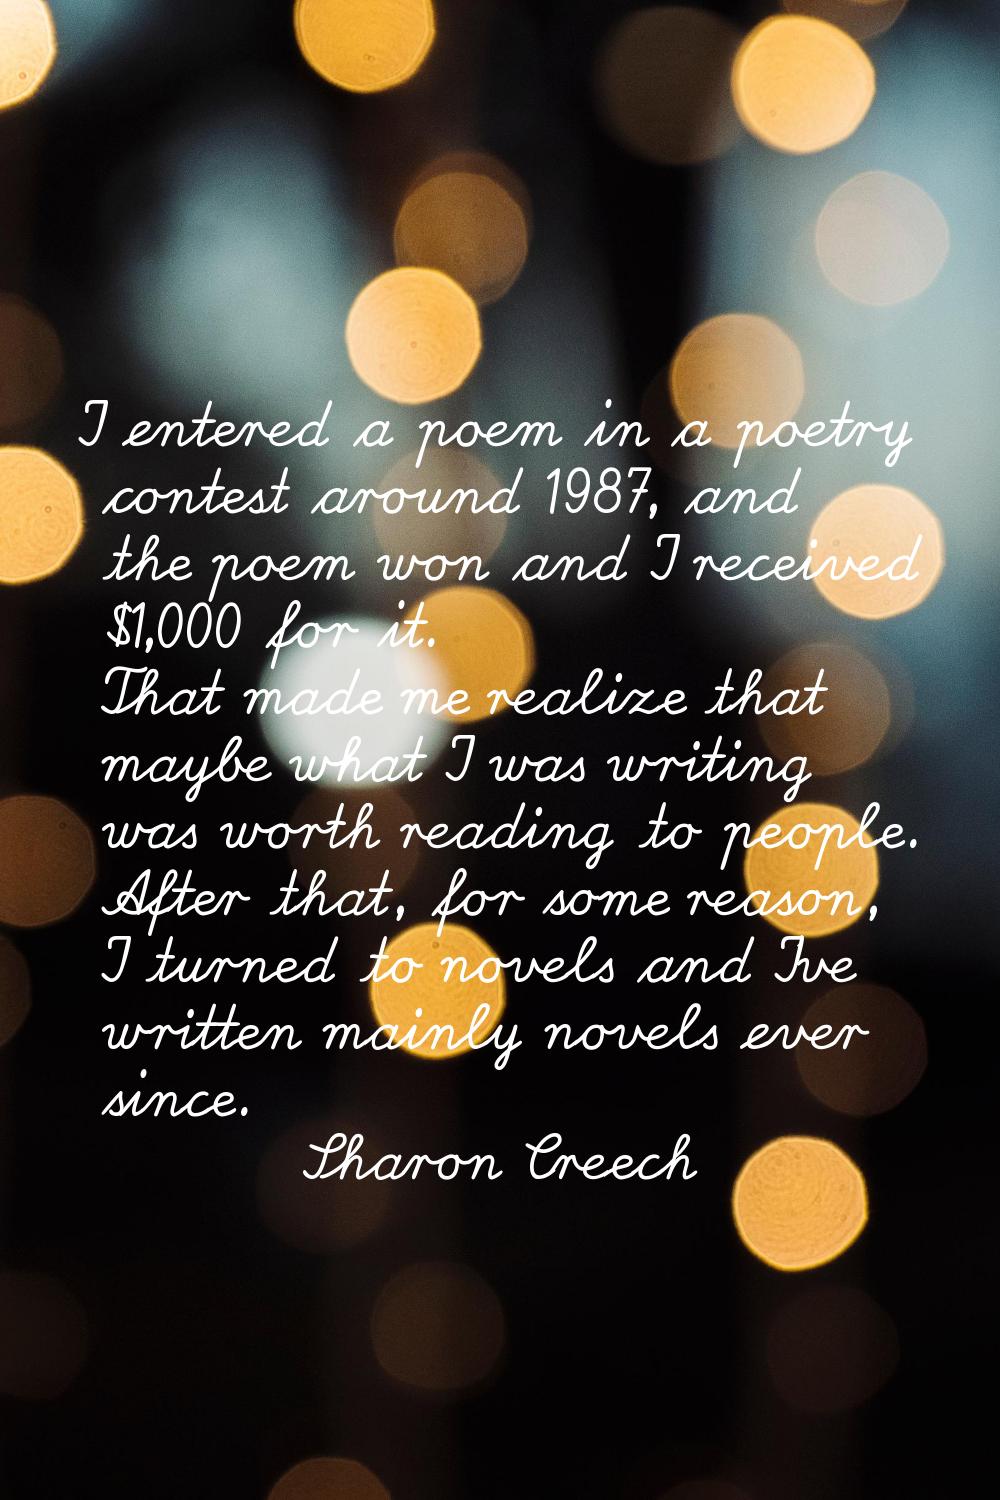 I entered a poem in a poetry contest around 1987, and the poem won and I received $1,000 for it. Th